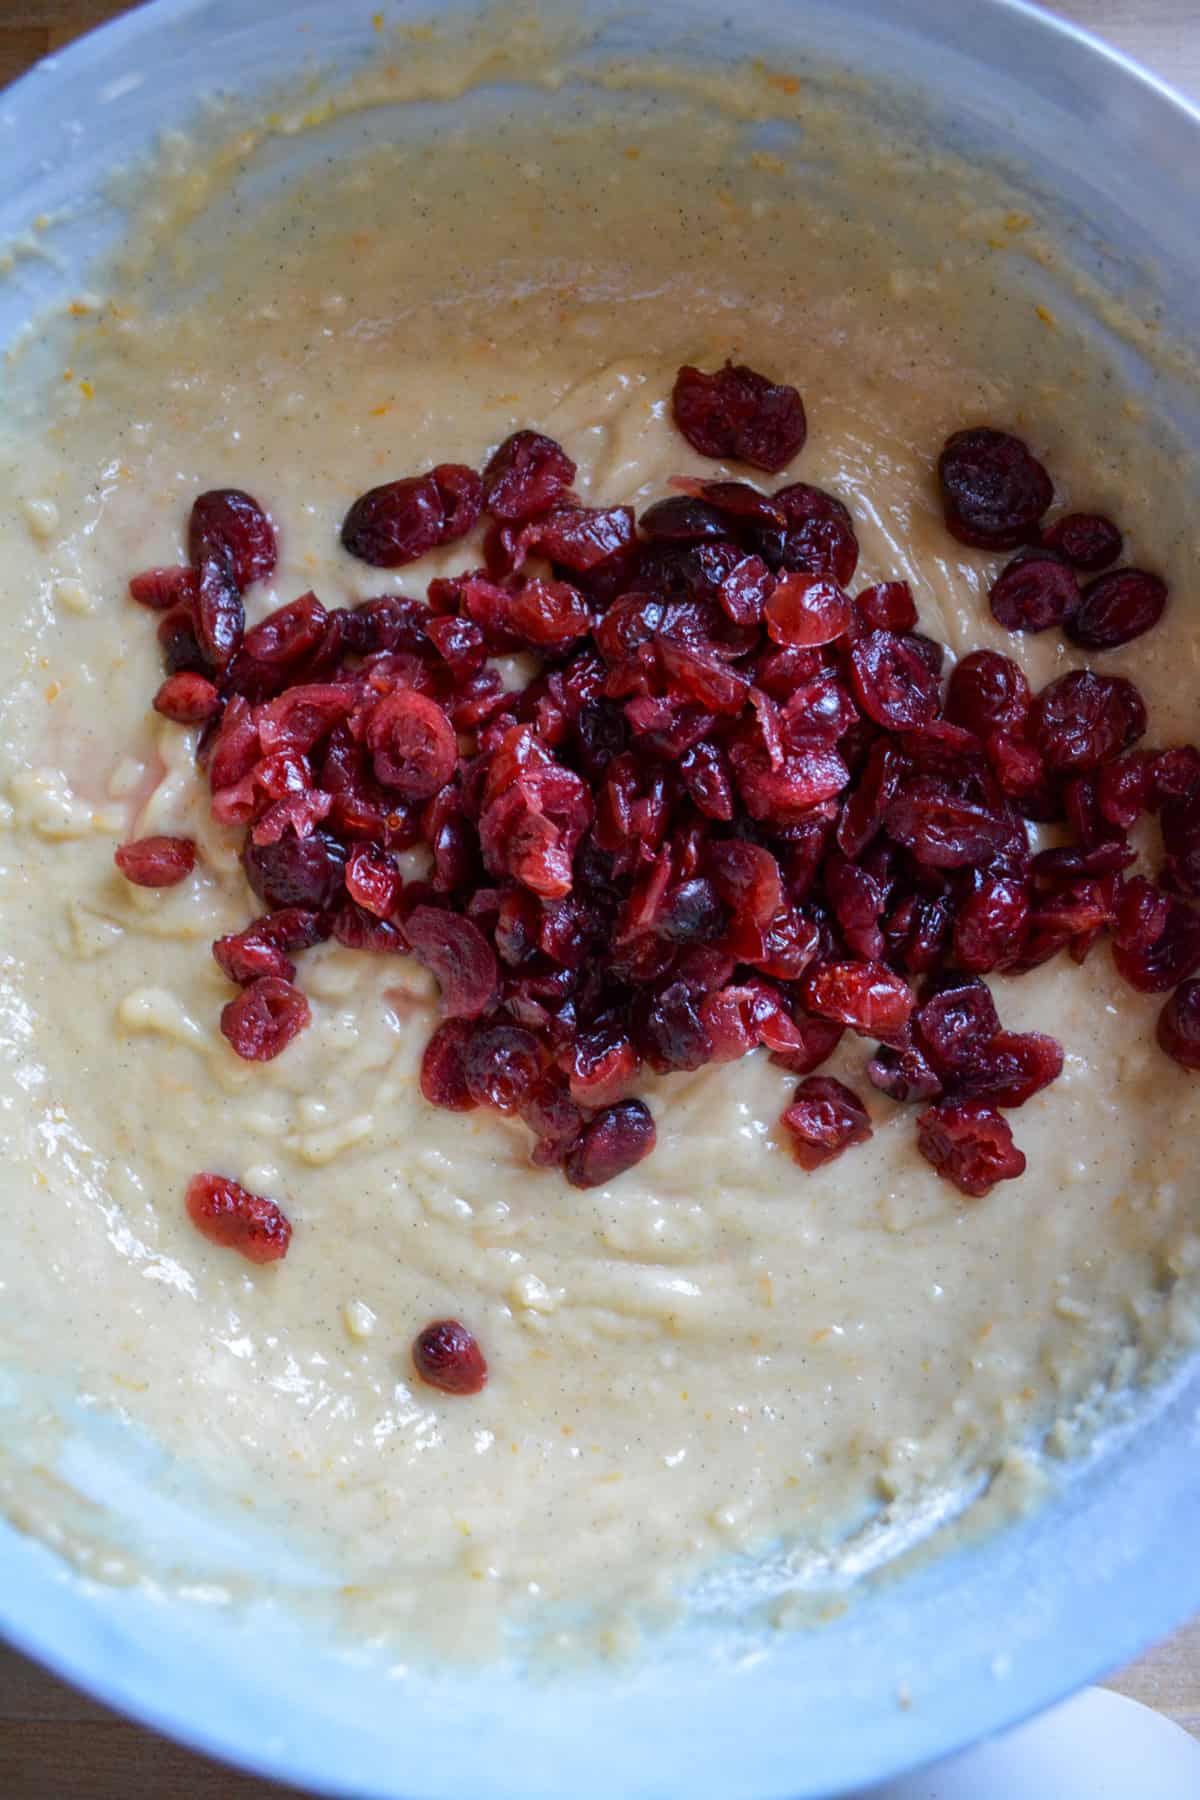 Cranberries added to the muffin batter.